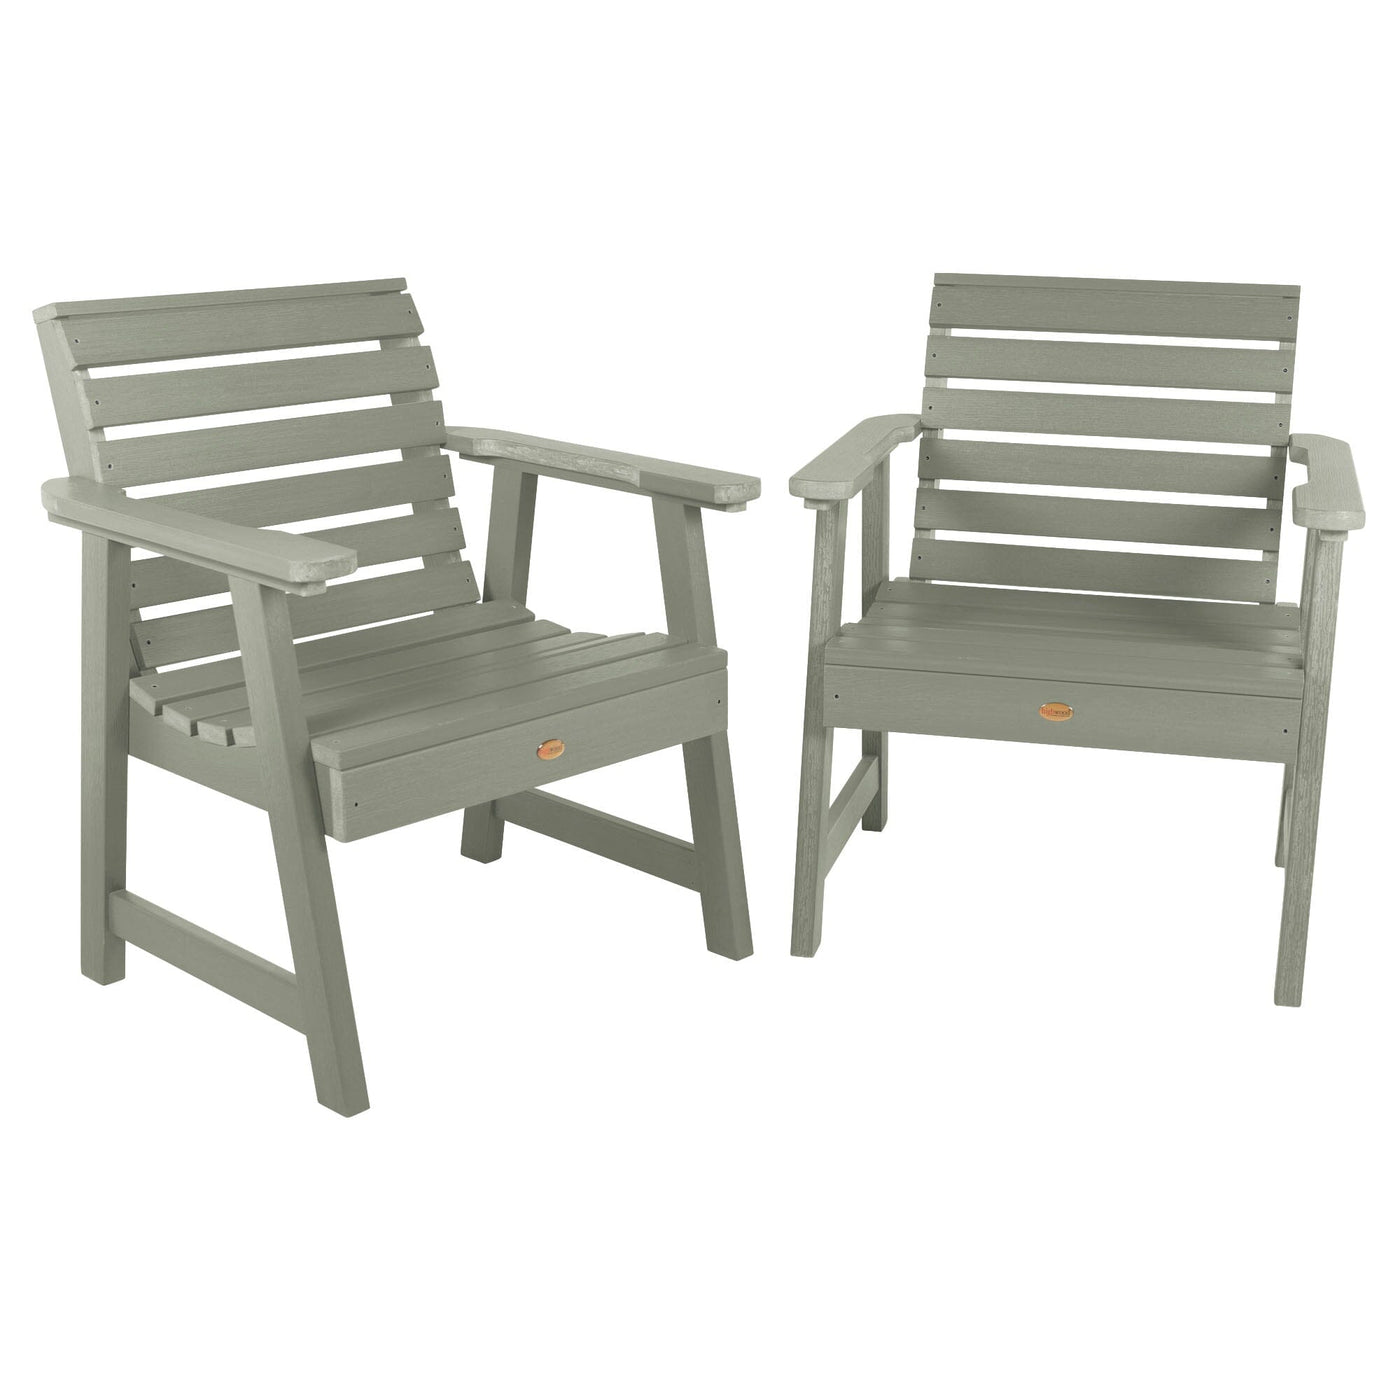 Set of 2 Weatherly Garden Chairs Kitted Sets Highwood USA Eucalyptus 